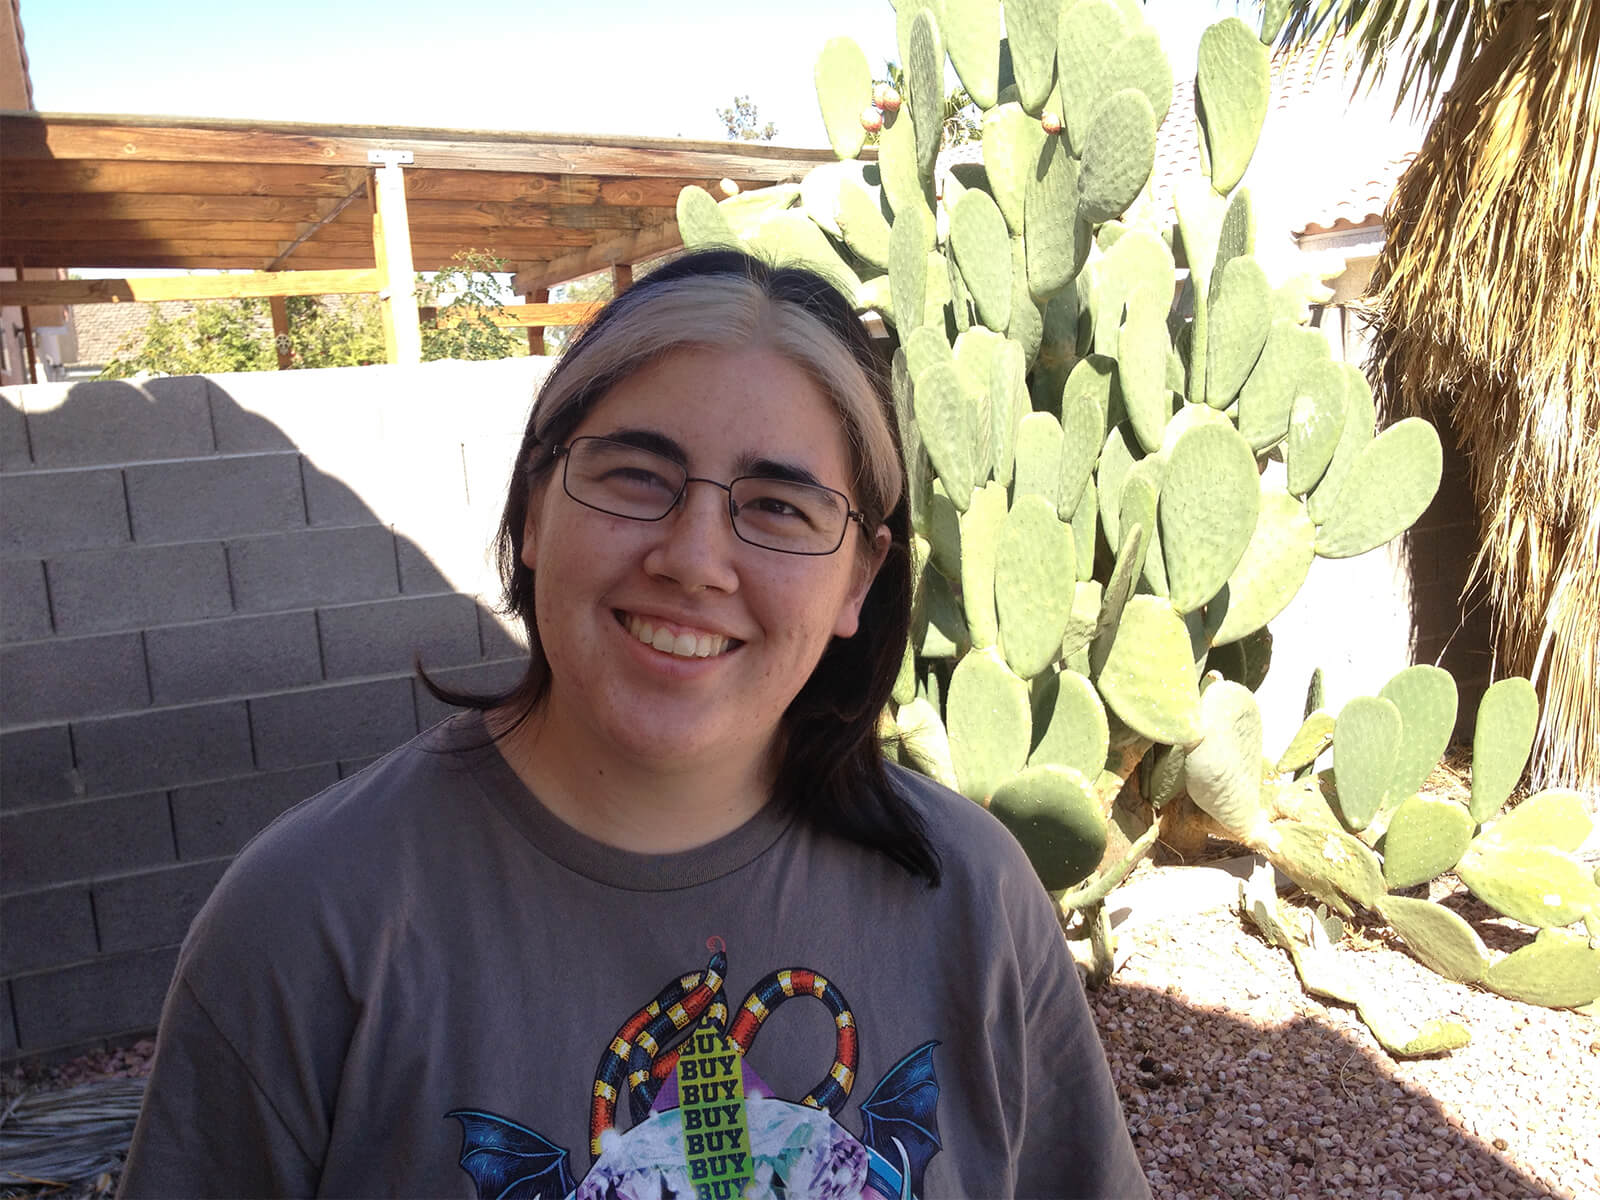 DigiPen graduate and Spry Fox senior software engineer Molly Jameson poses in front of a cactus. 